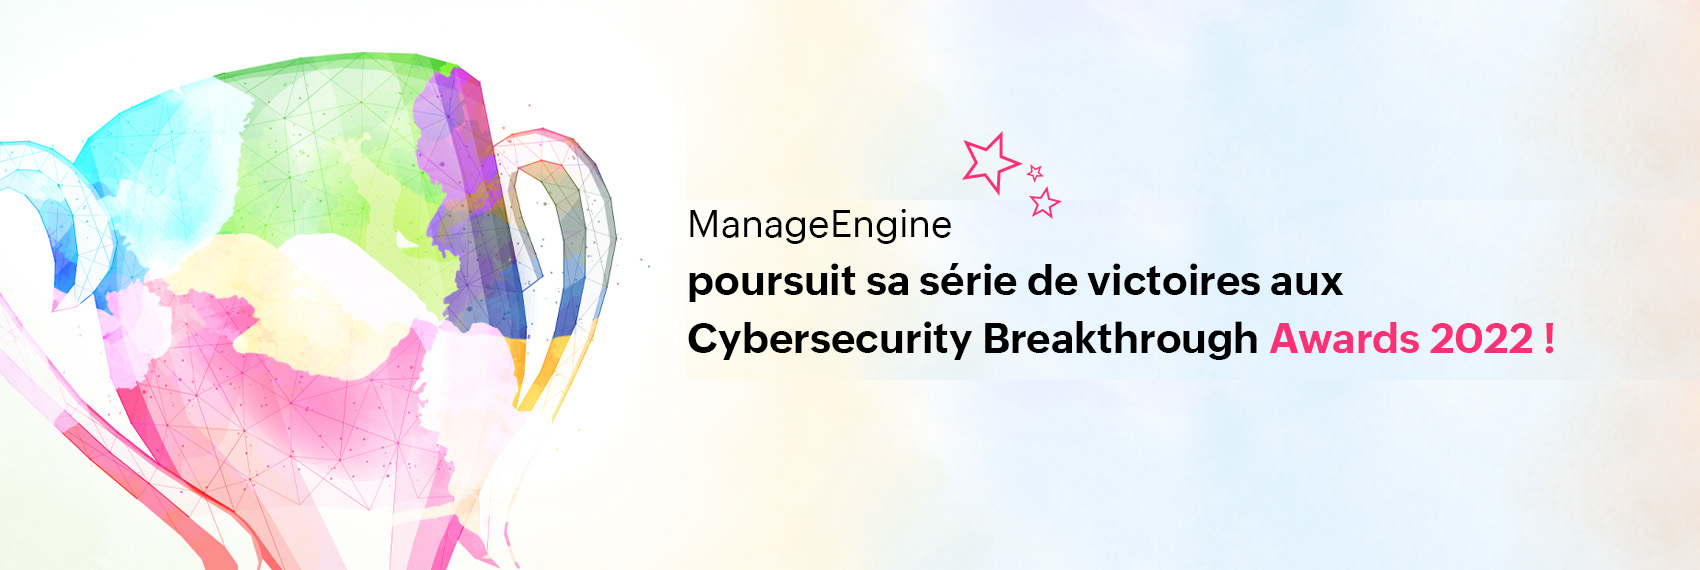 ManageEngine remporte les Cybersecurity Breakthrough Awards 2022 !